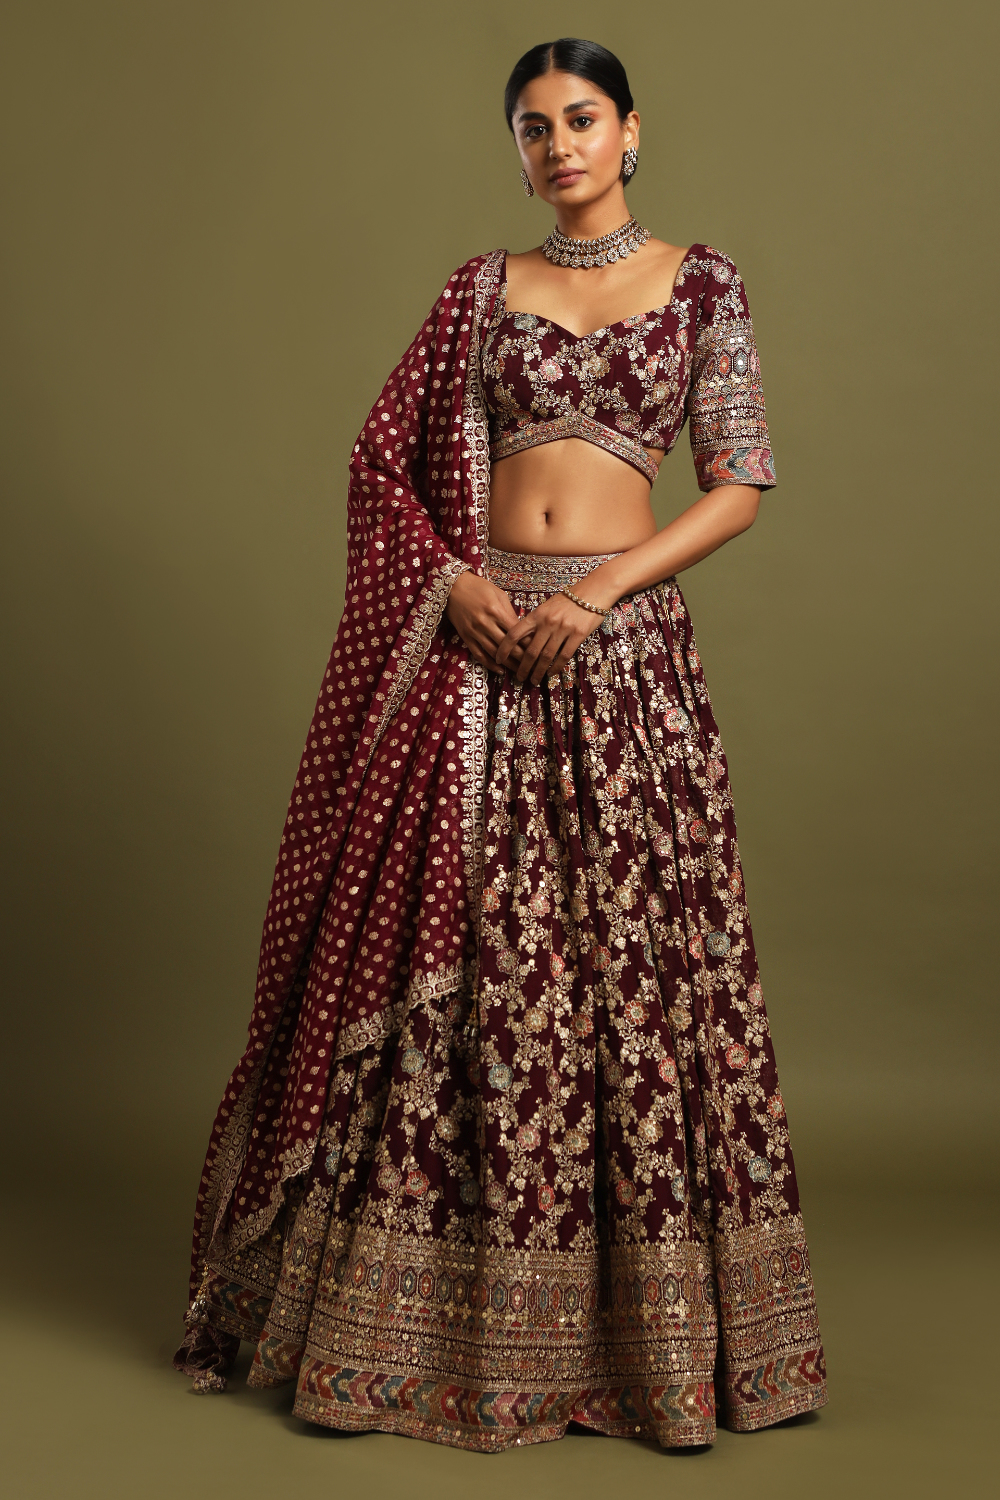 30+ Real Brides Who Looked GORGE in Wine Lehengas & We Cannot Stop Swooning  Over Them | Indian bridal outfits, Latest bridal lehenga designs, Indian  bride outfits